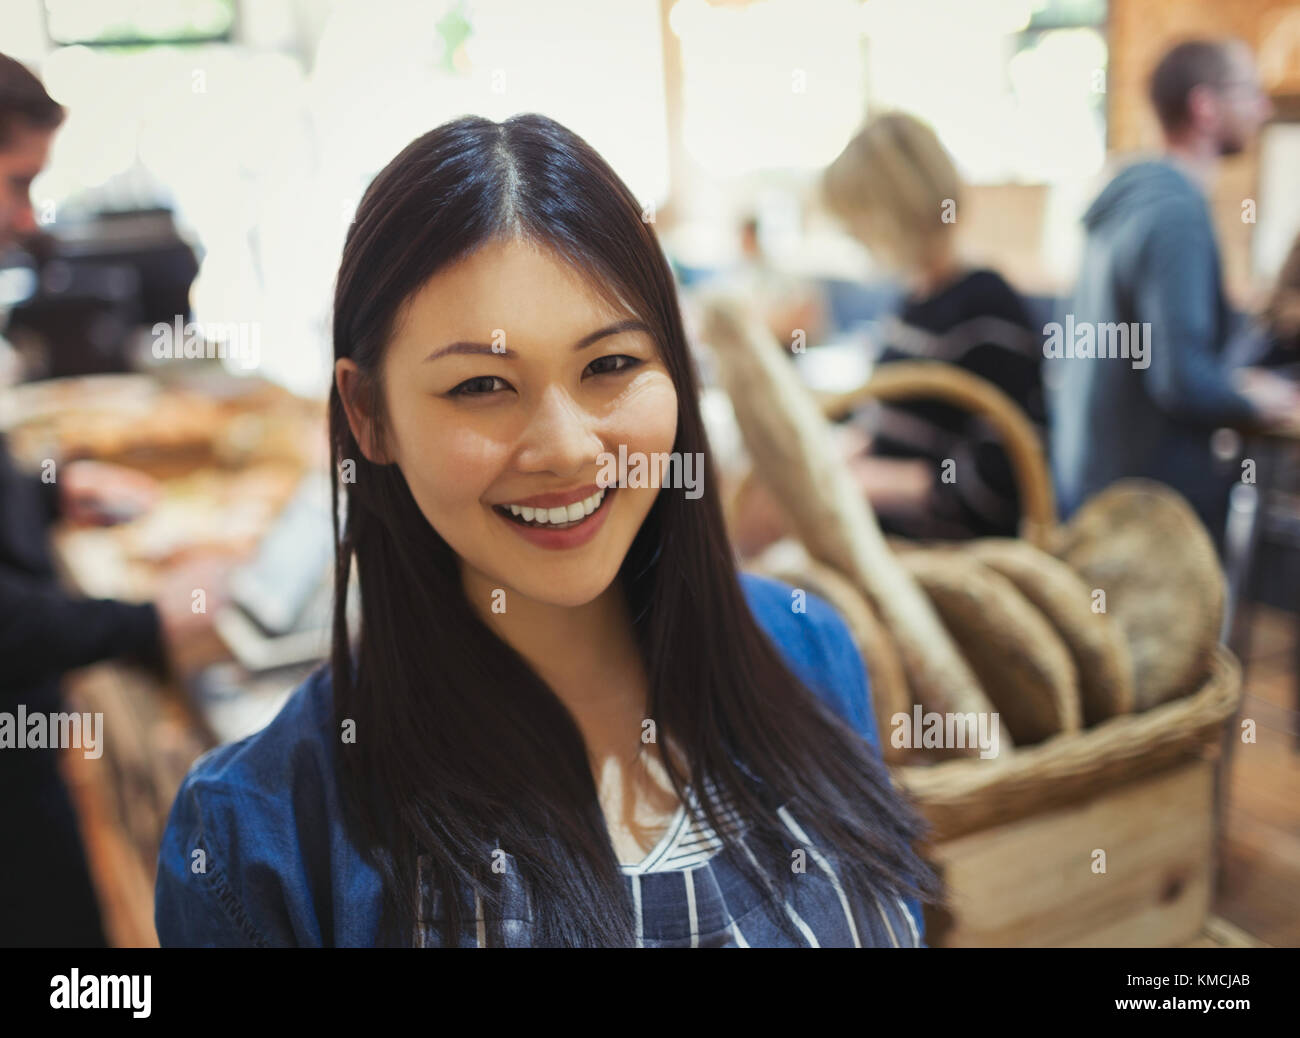 Portrait smiling young woman in grocery store Stock Photo